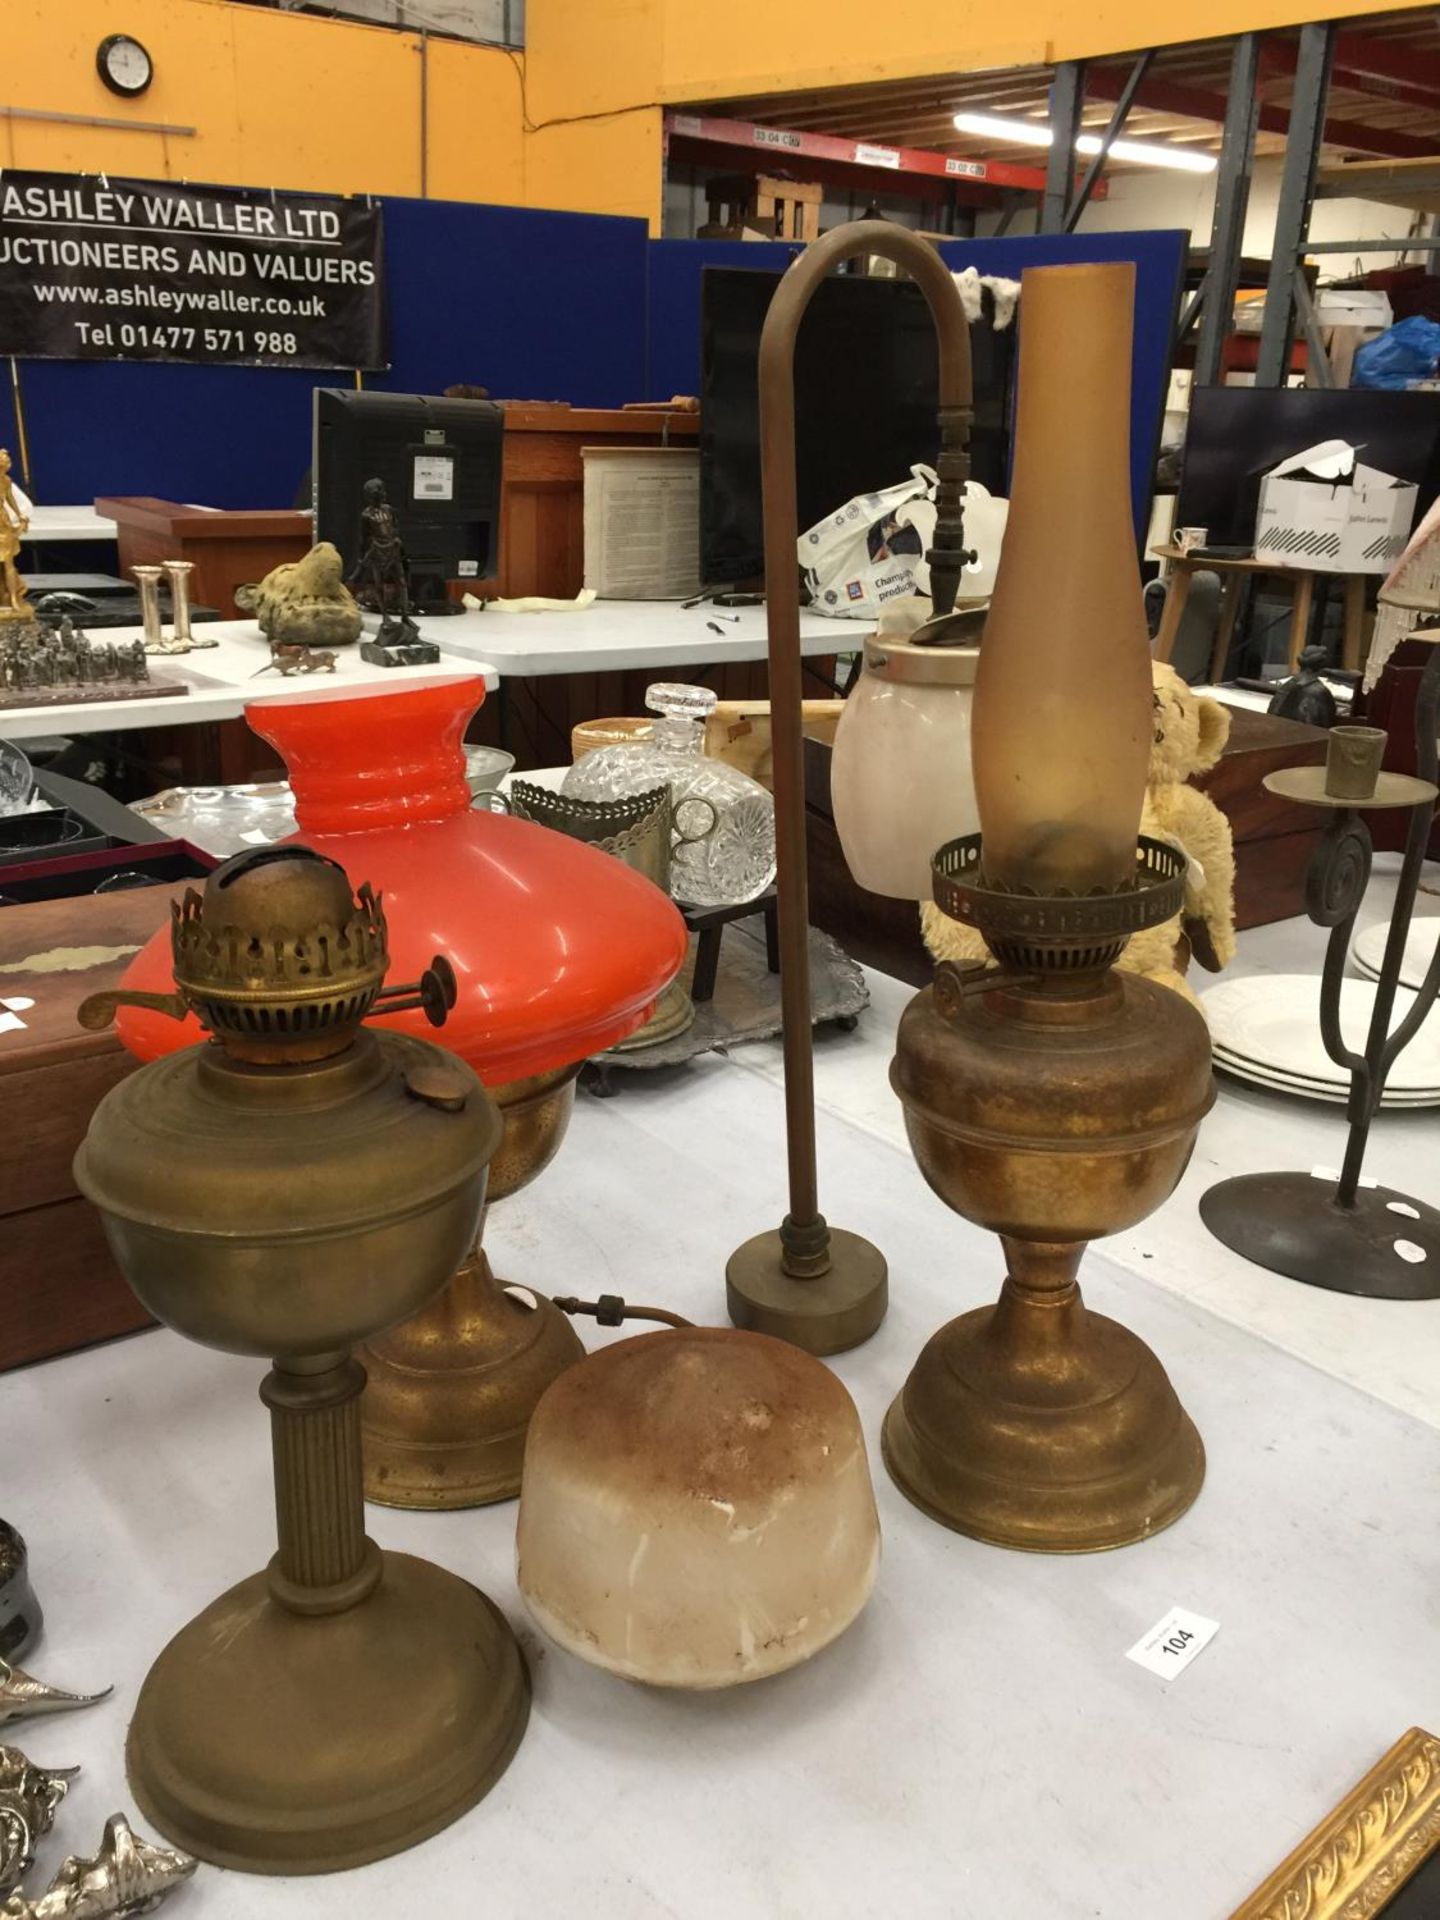 THREE BRASS OIL LAMPS - TWO MISSING CHIMNEYS PLUS A BRASS AND GLASS VERITAS LAMP